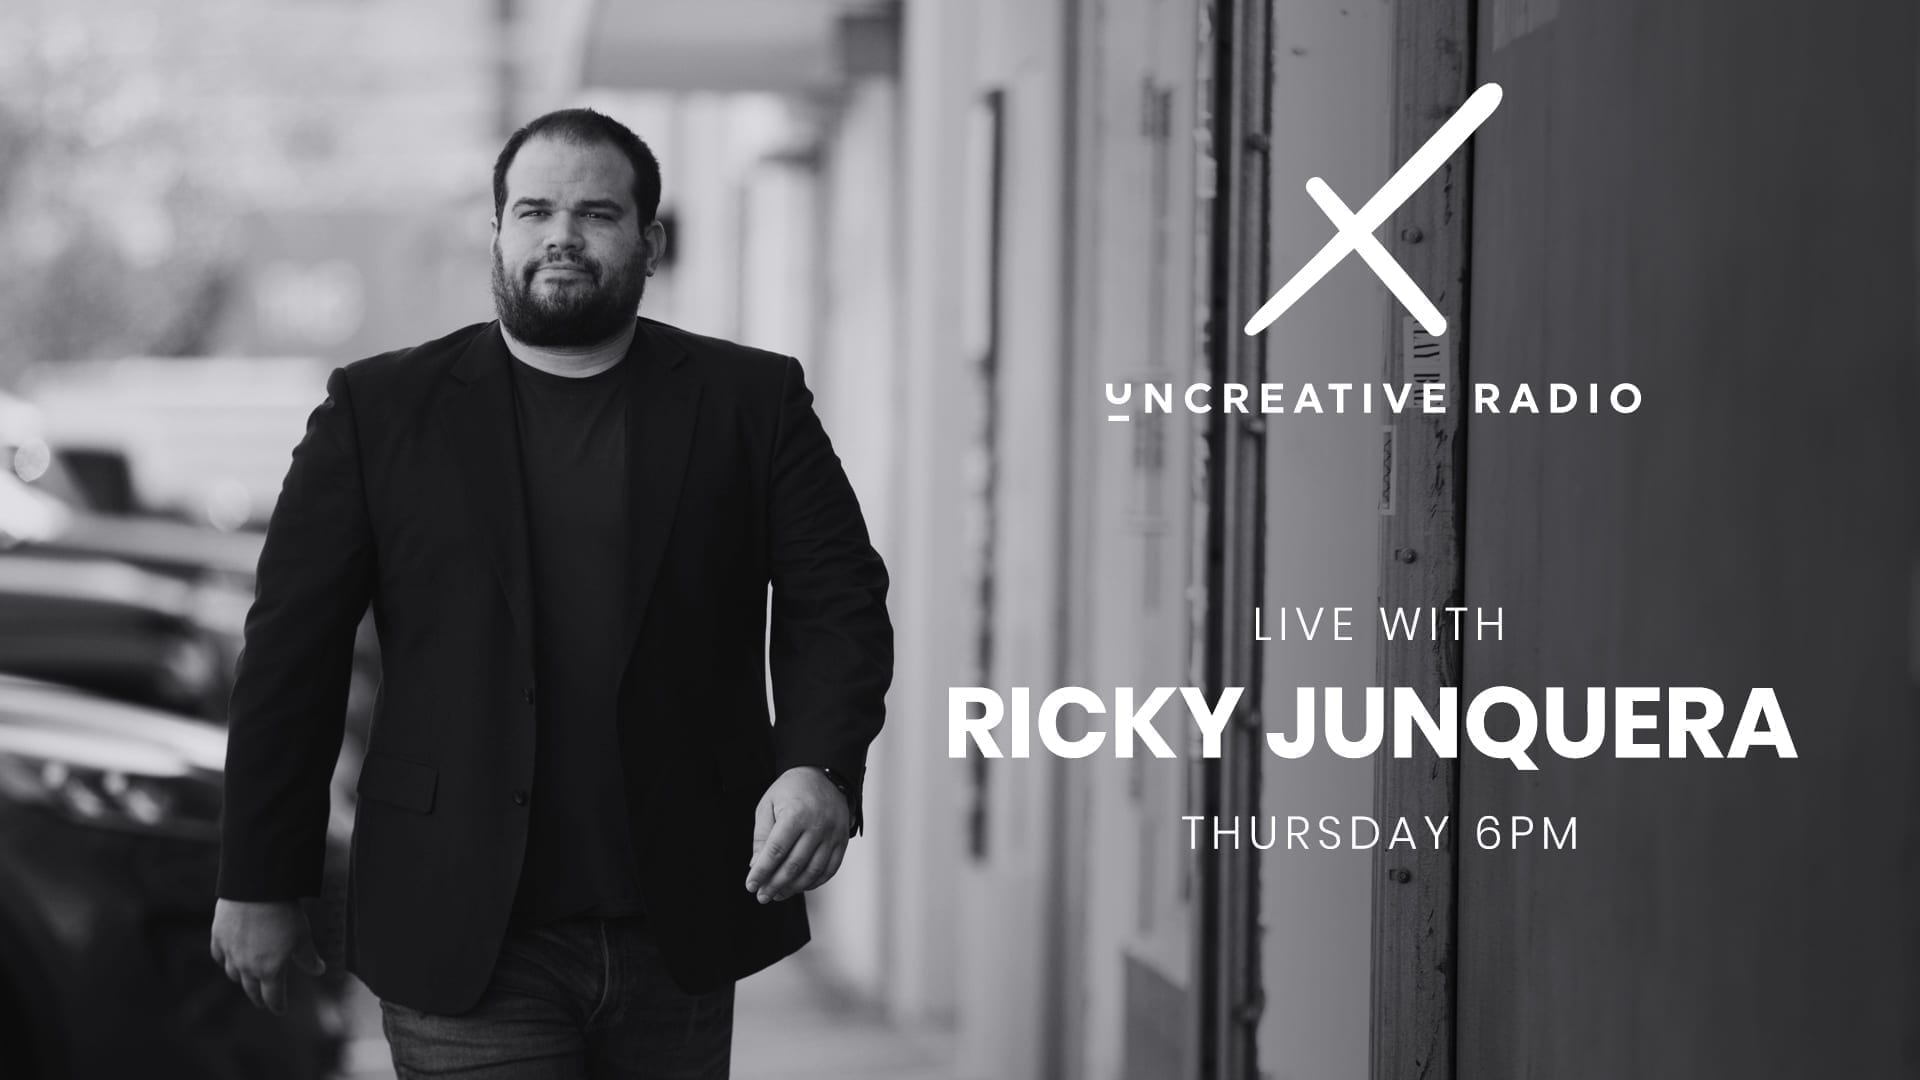 Guest Ricky Junquera on Uncreative Radio